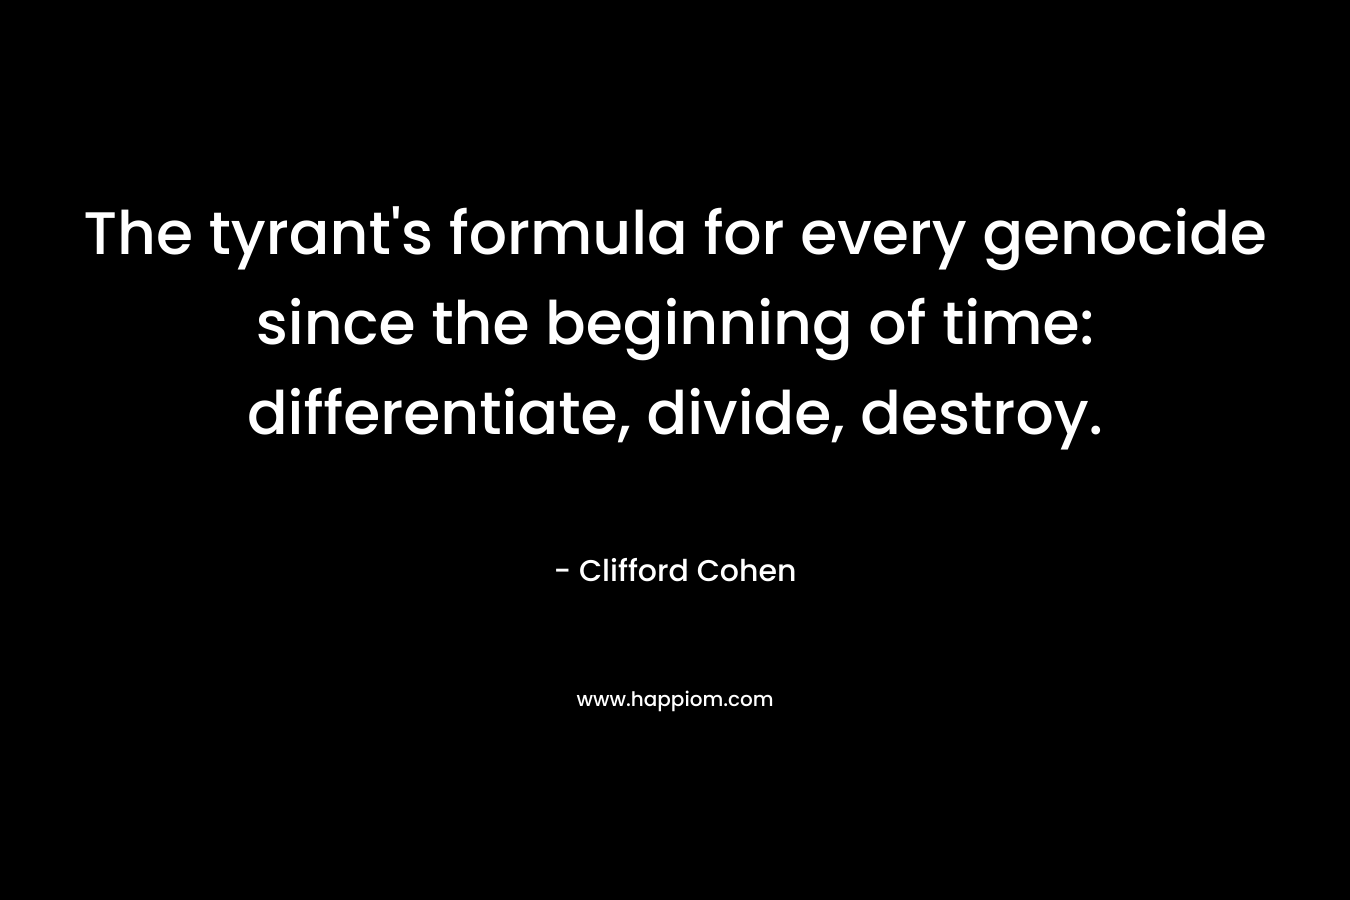 The tyrant’s formula for every genocide since the beginning of time: differentiate, divide, destroy. – Clifford Cohen